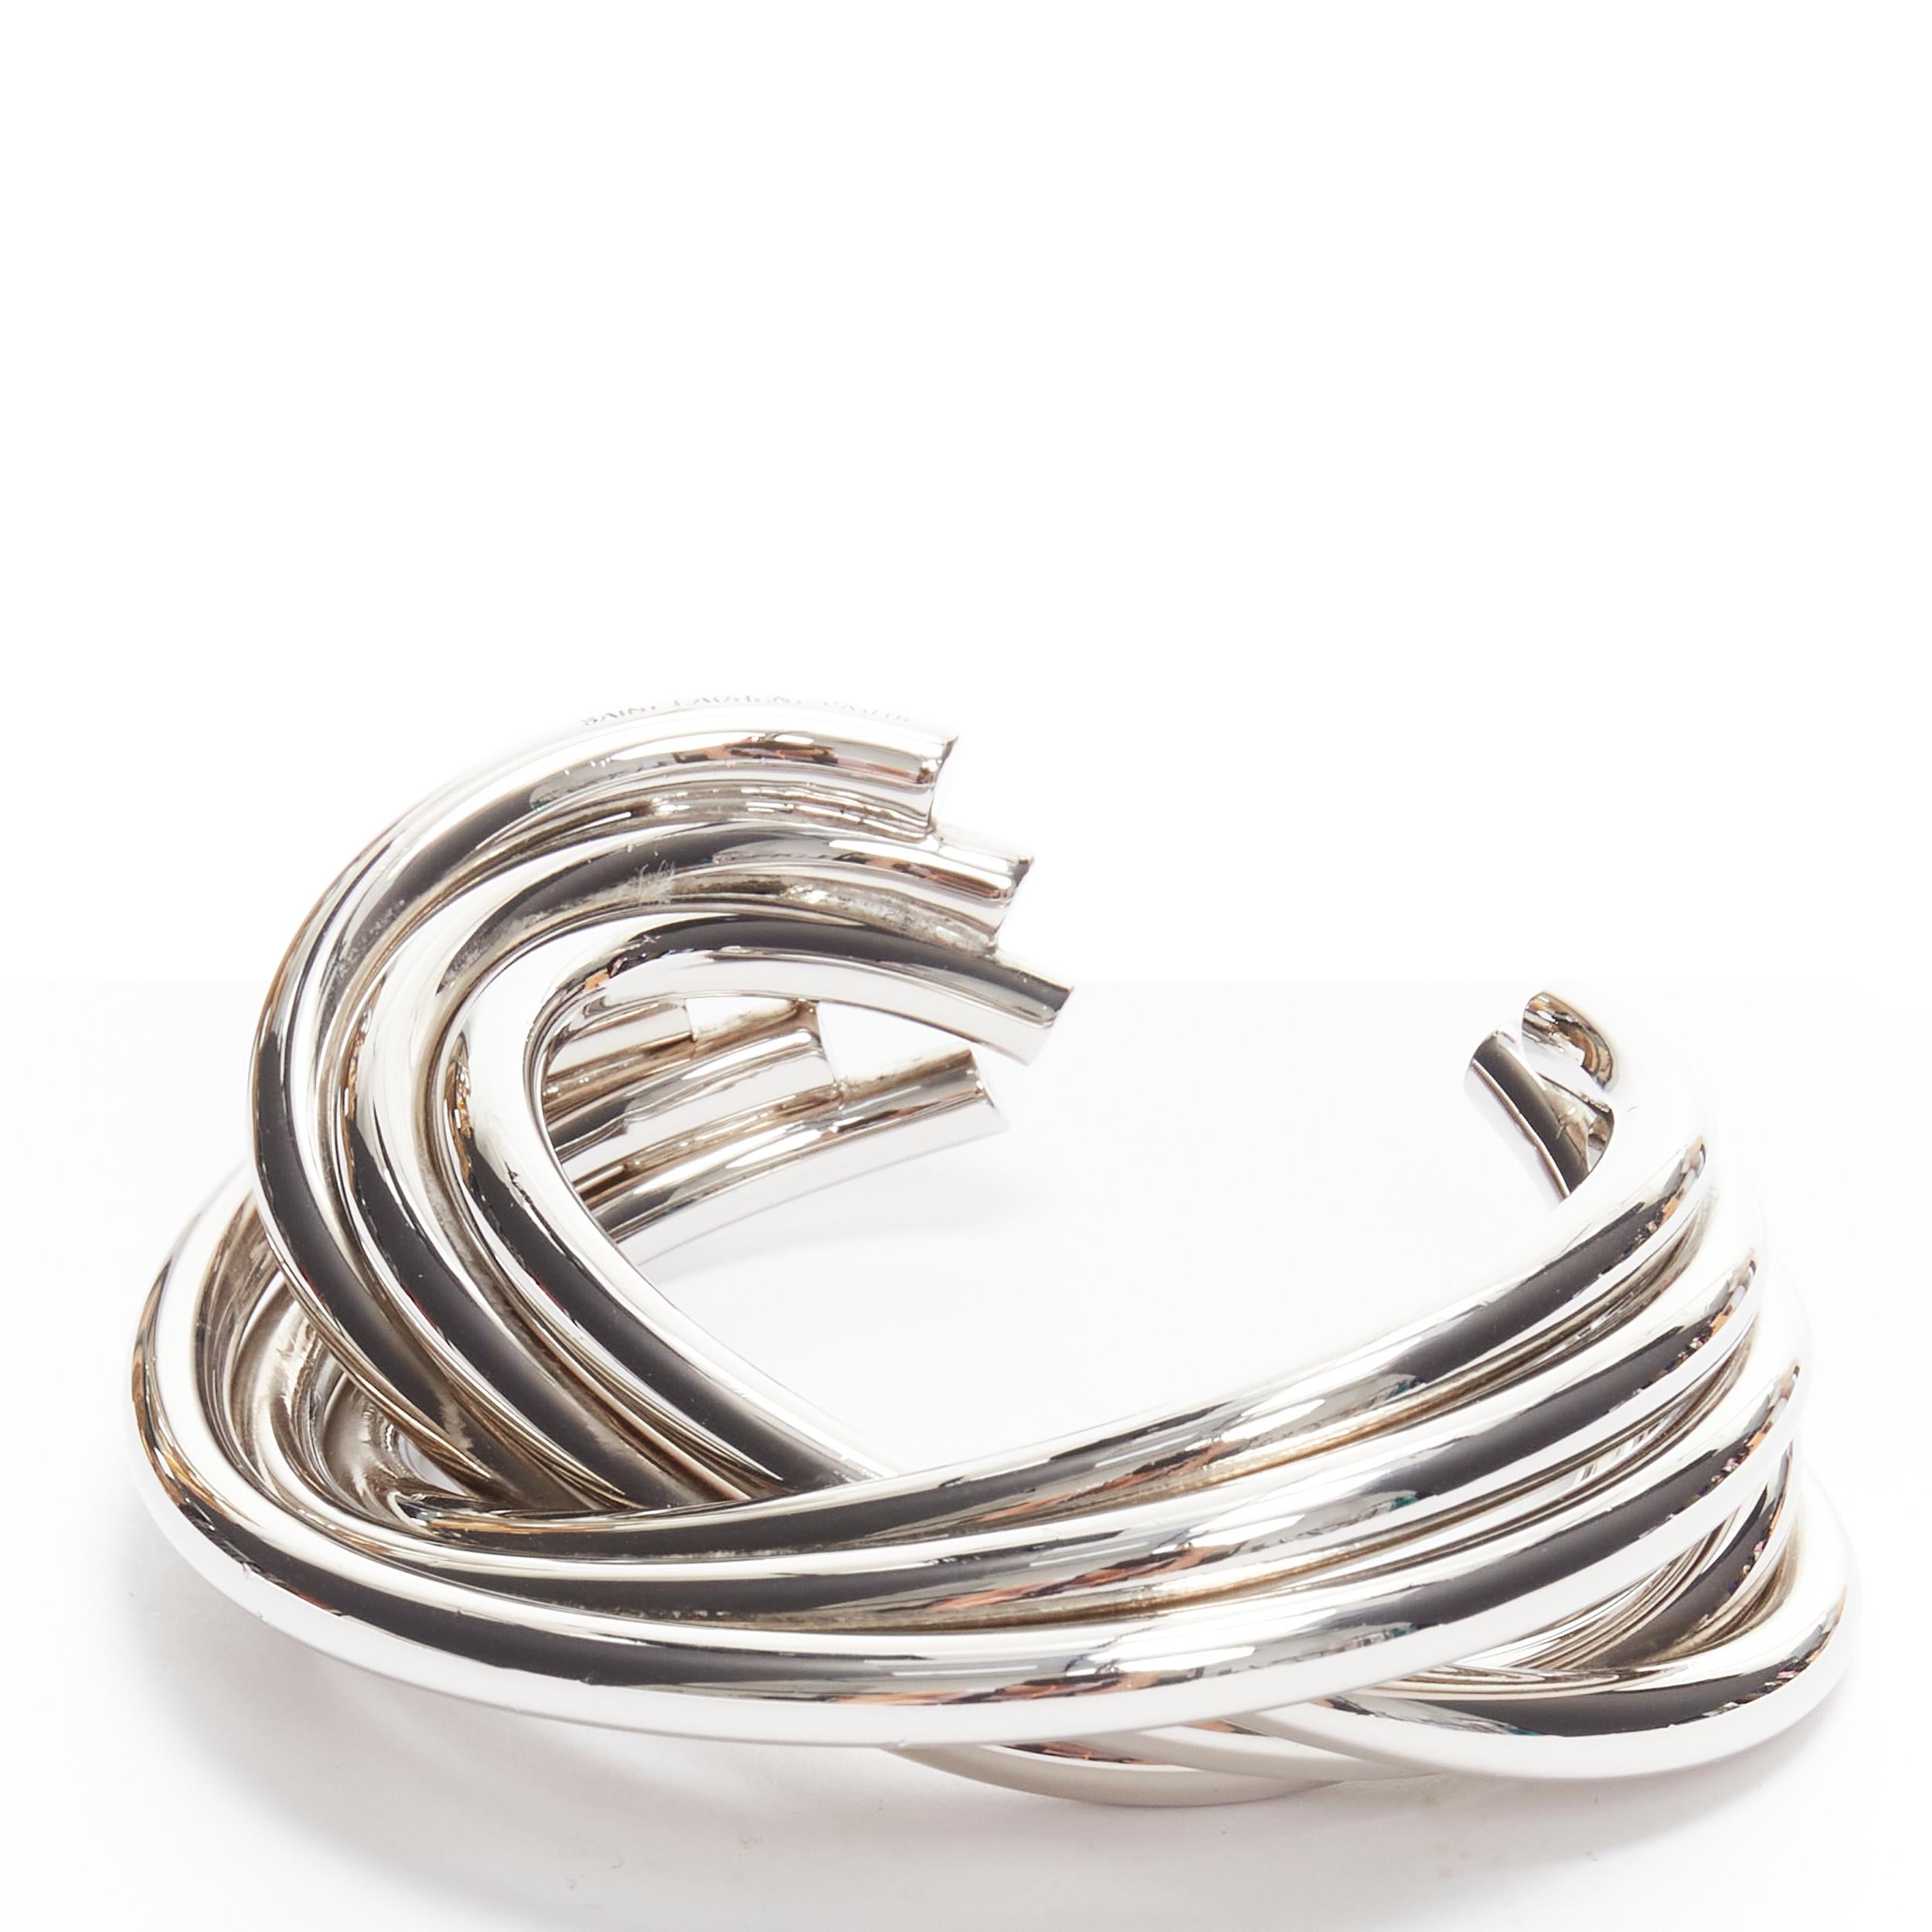 SAINT LAURENT Hedi Slimane silver brass architectural 6 layer twist cuff 
Reference: TGAS/B01757 
Brand: Saint Laurent 
Designer: Hedi Slimane 
Color: Silver 
Pattern: Solid 
Extra Detail: Hedi Slimane for Saint Laurent. Designed to look like 6